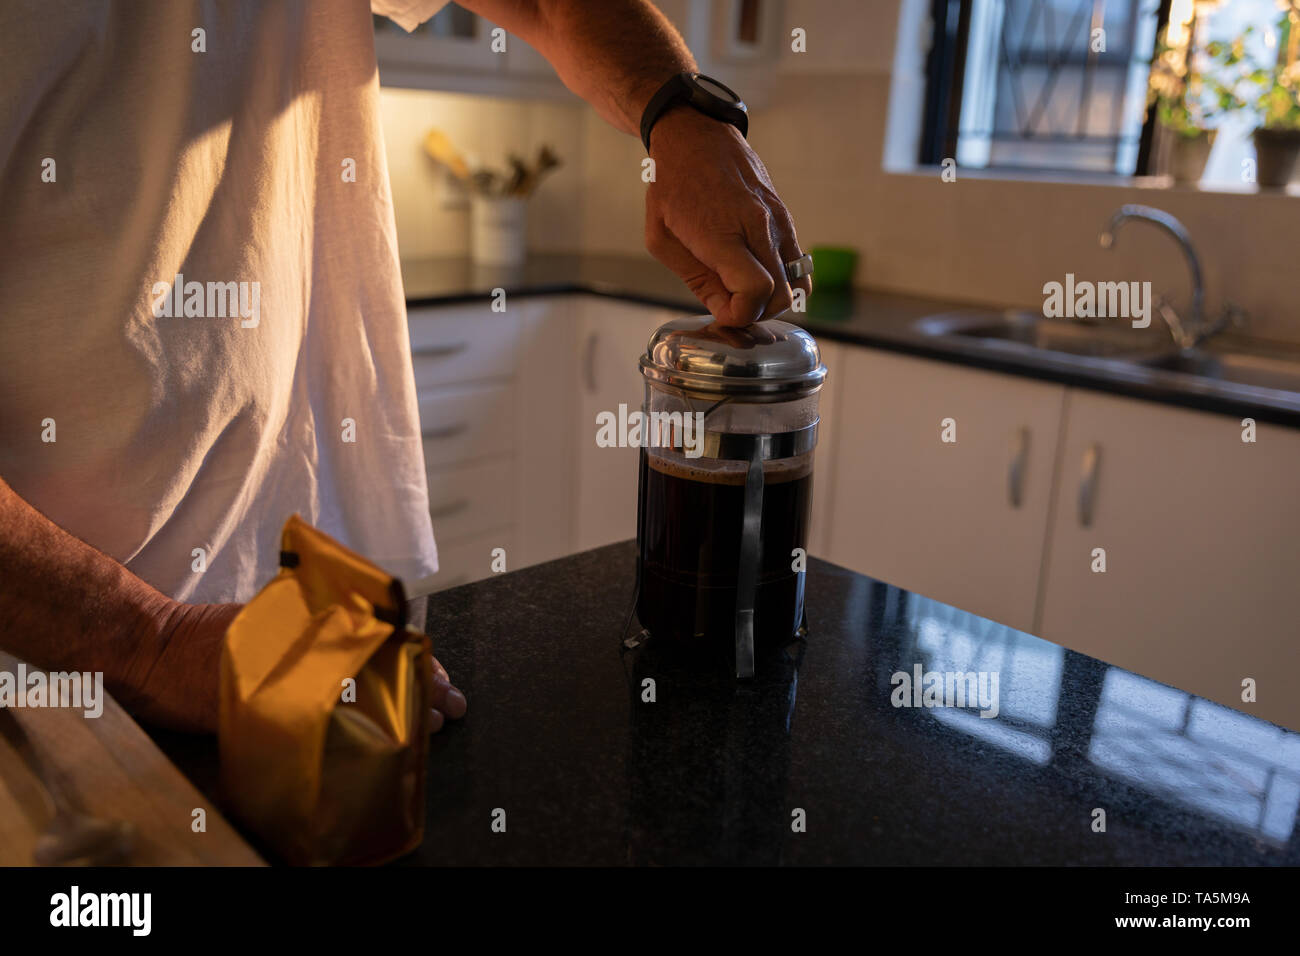 Mature man preparing coffee in kitchen at home Stock Photo